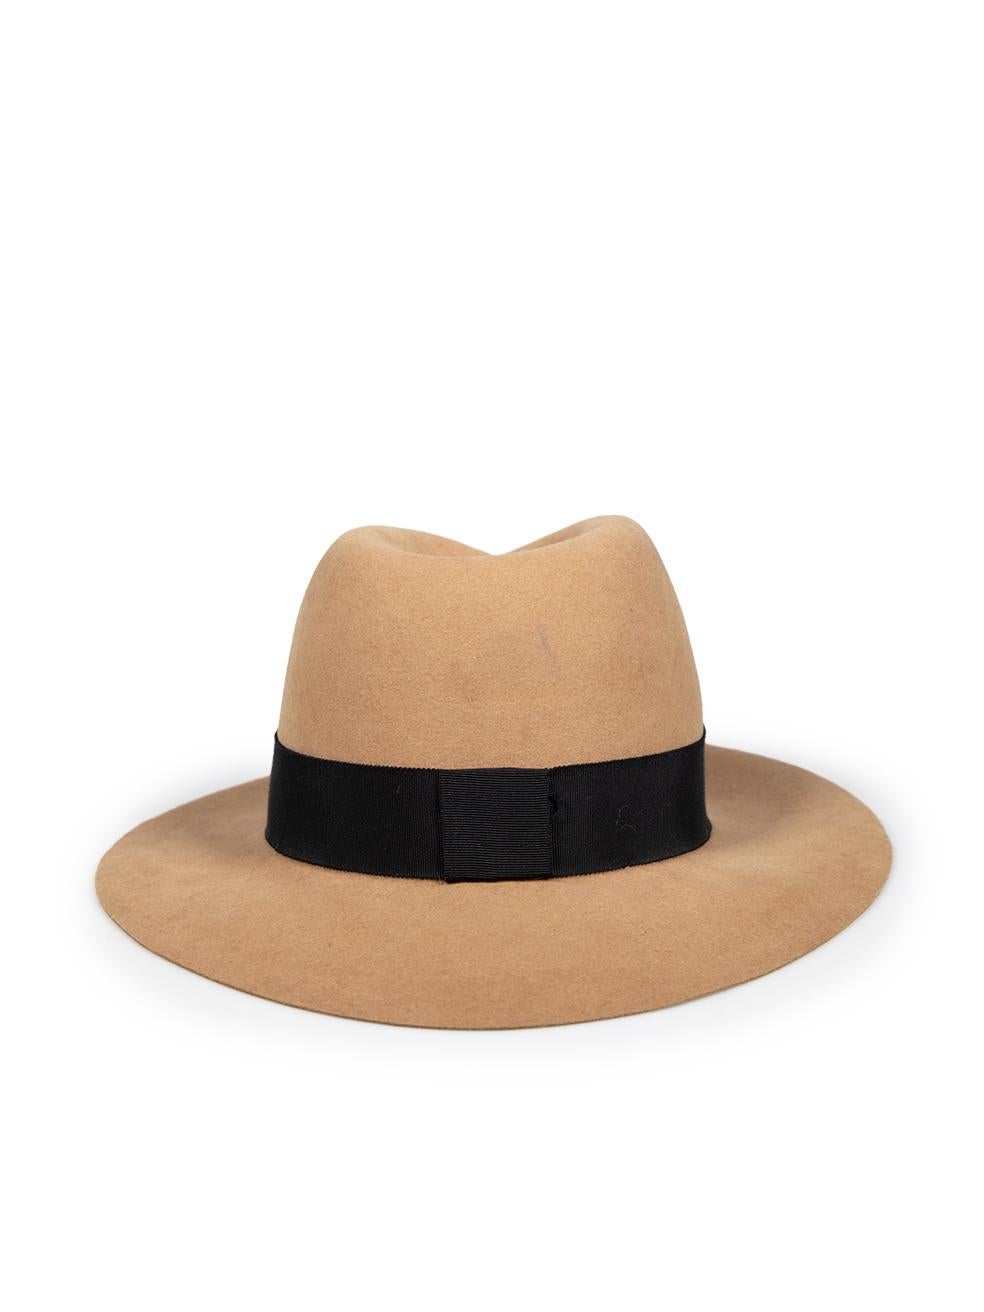 Maison Michel Camel Wool Felt Hat In Good Condition For Sale In London, GB